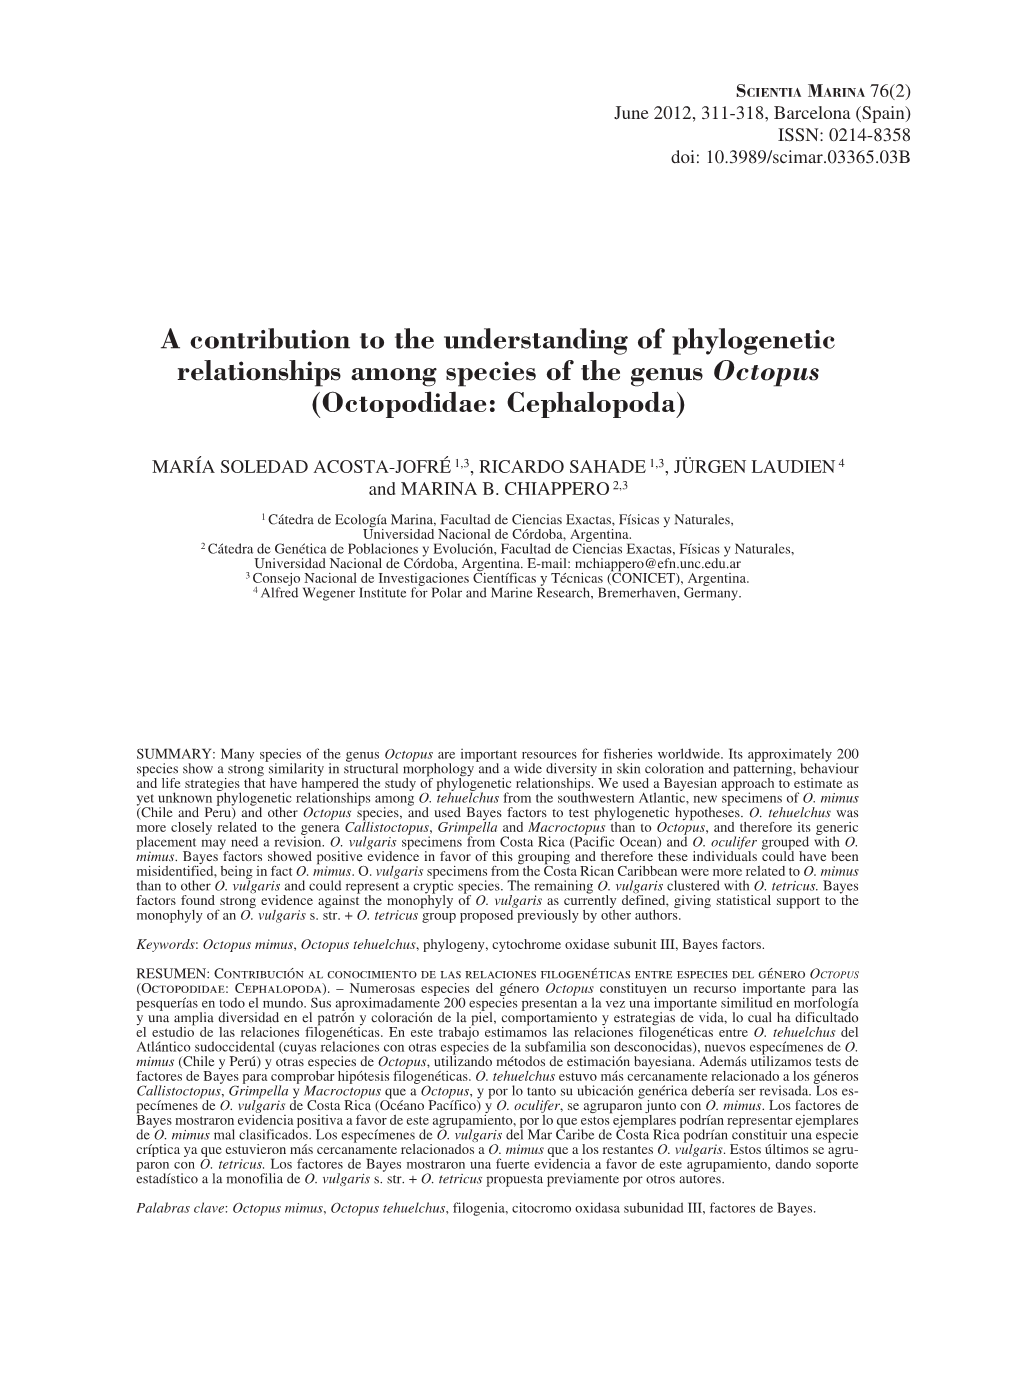 A Contribution to the Understanding of Phylogenetic Relationships Among Species of the Genus Octopus (Octopodidae: Cephalopoda)